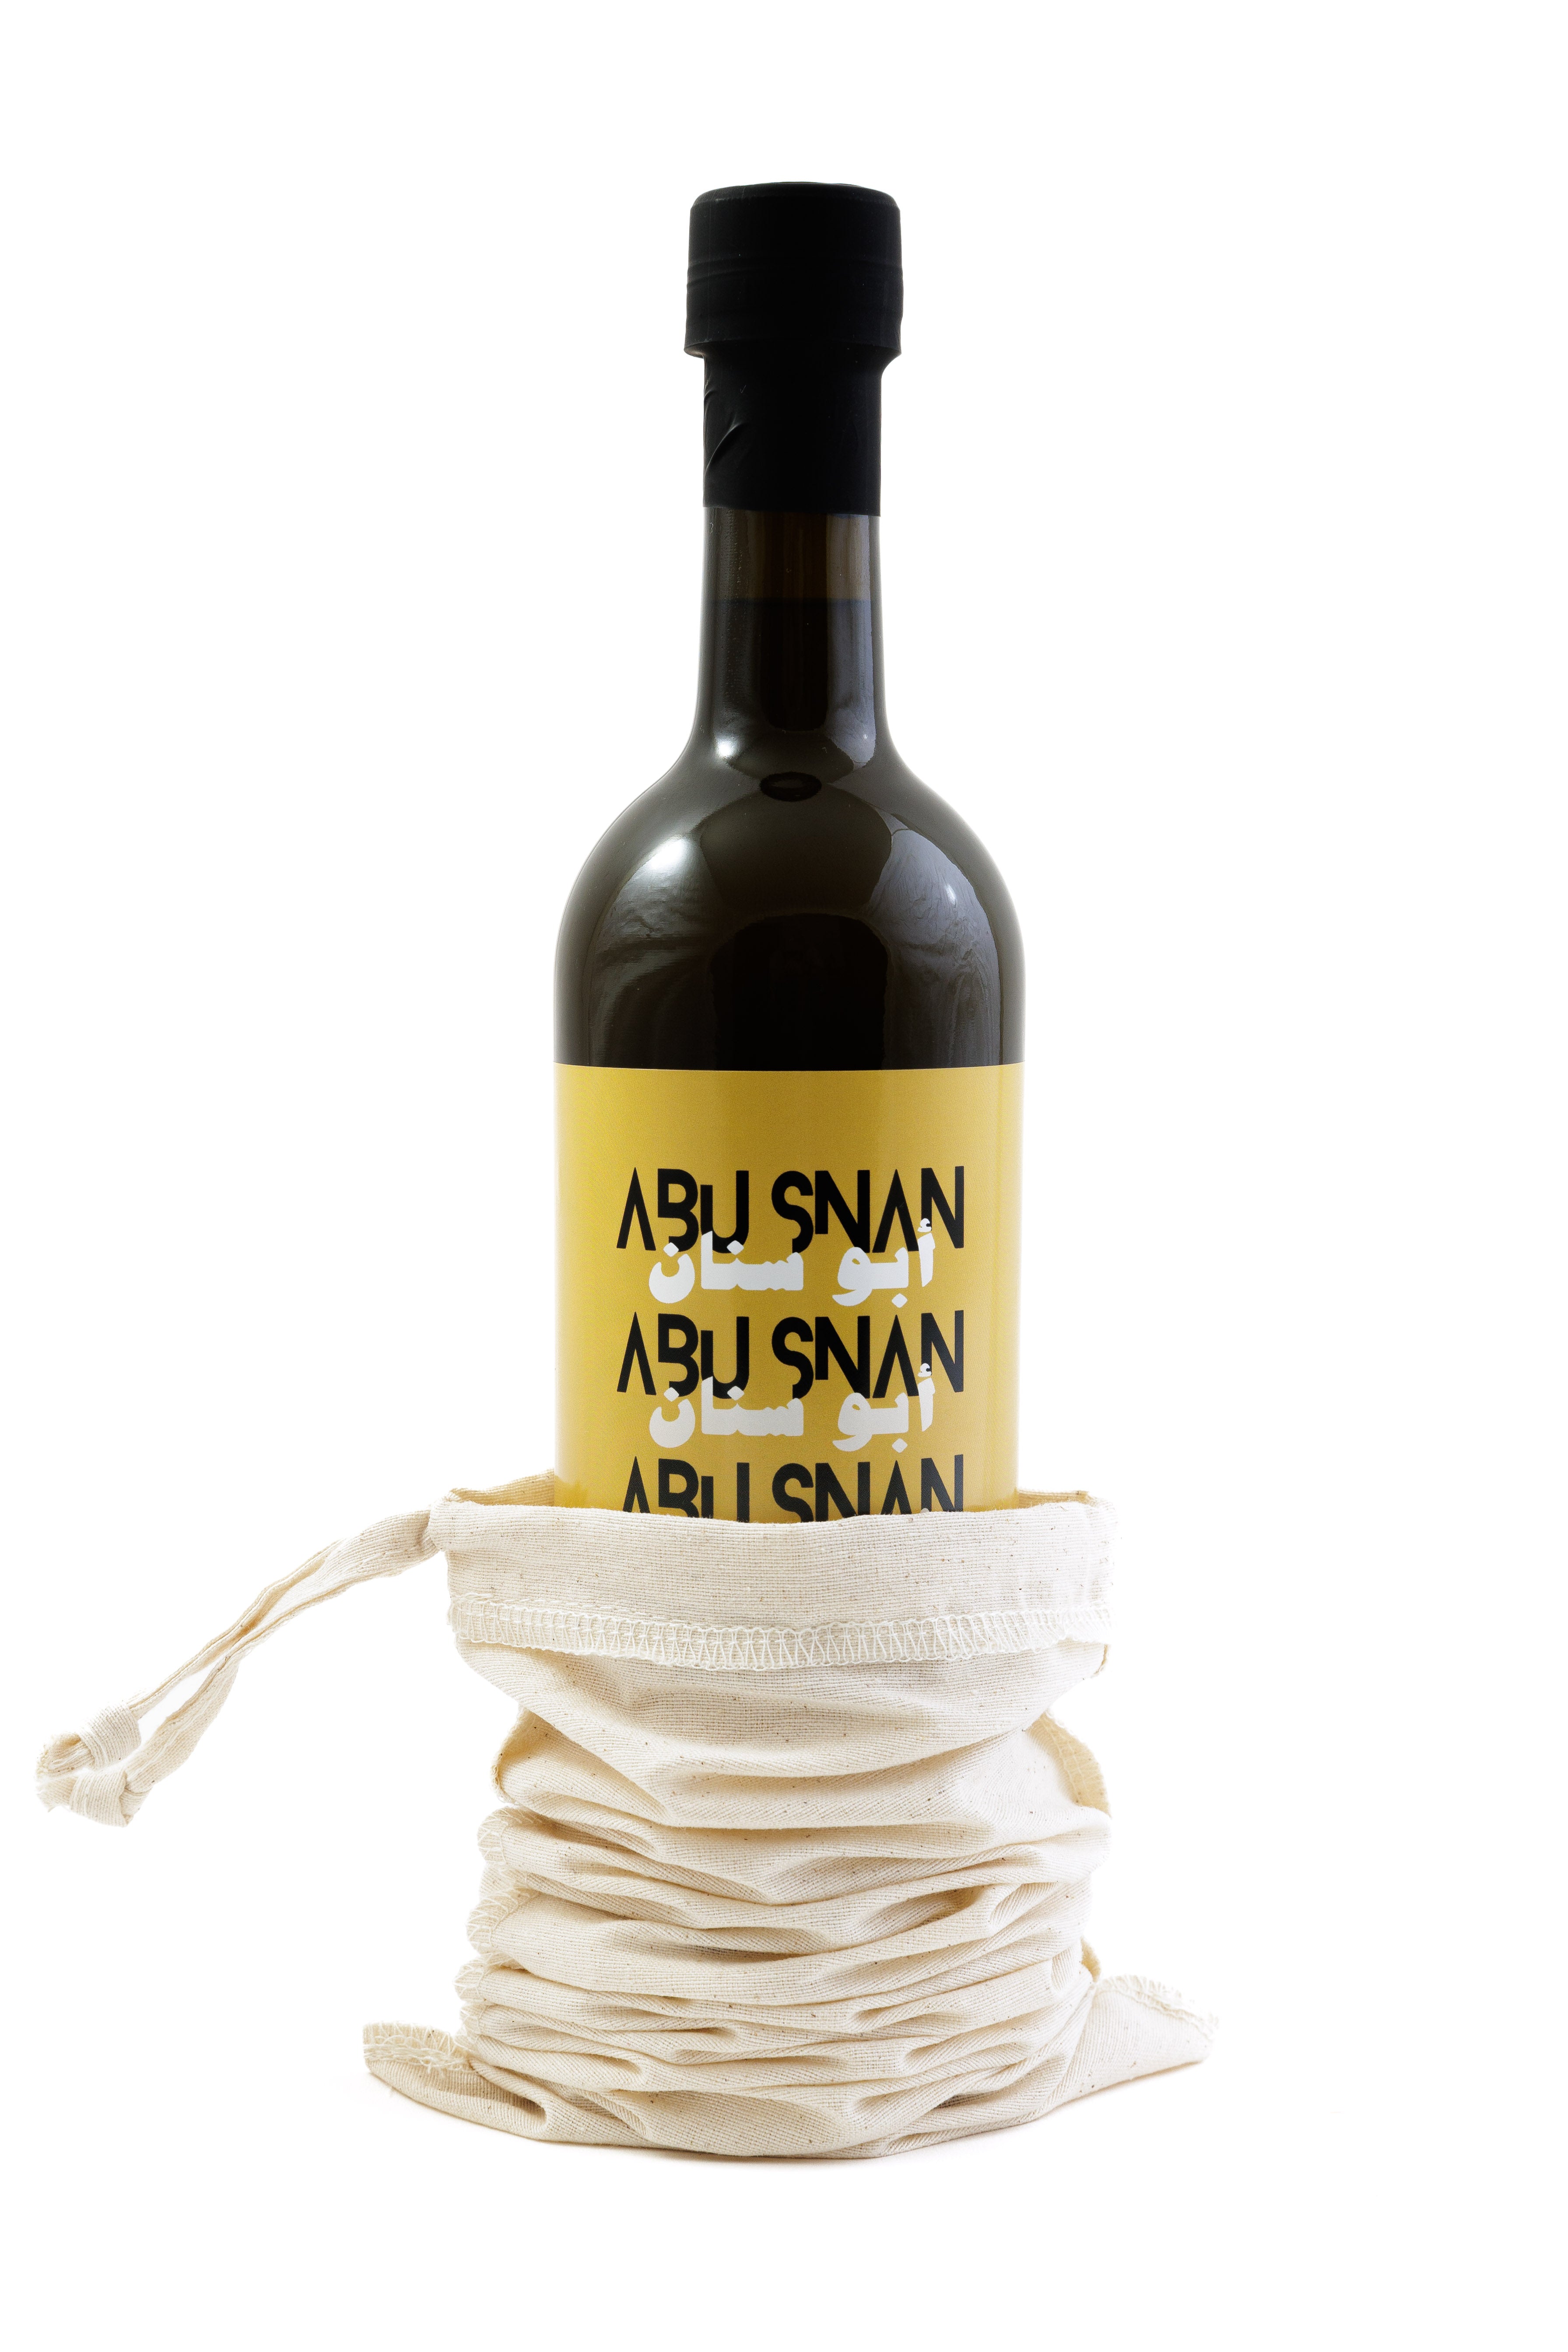 Abu Snan's Millstone Extracted Olive Oil - Smooth, Zesty, and Full Body [Harvest Year: 2023]